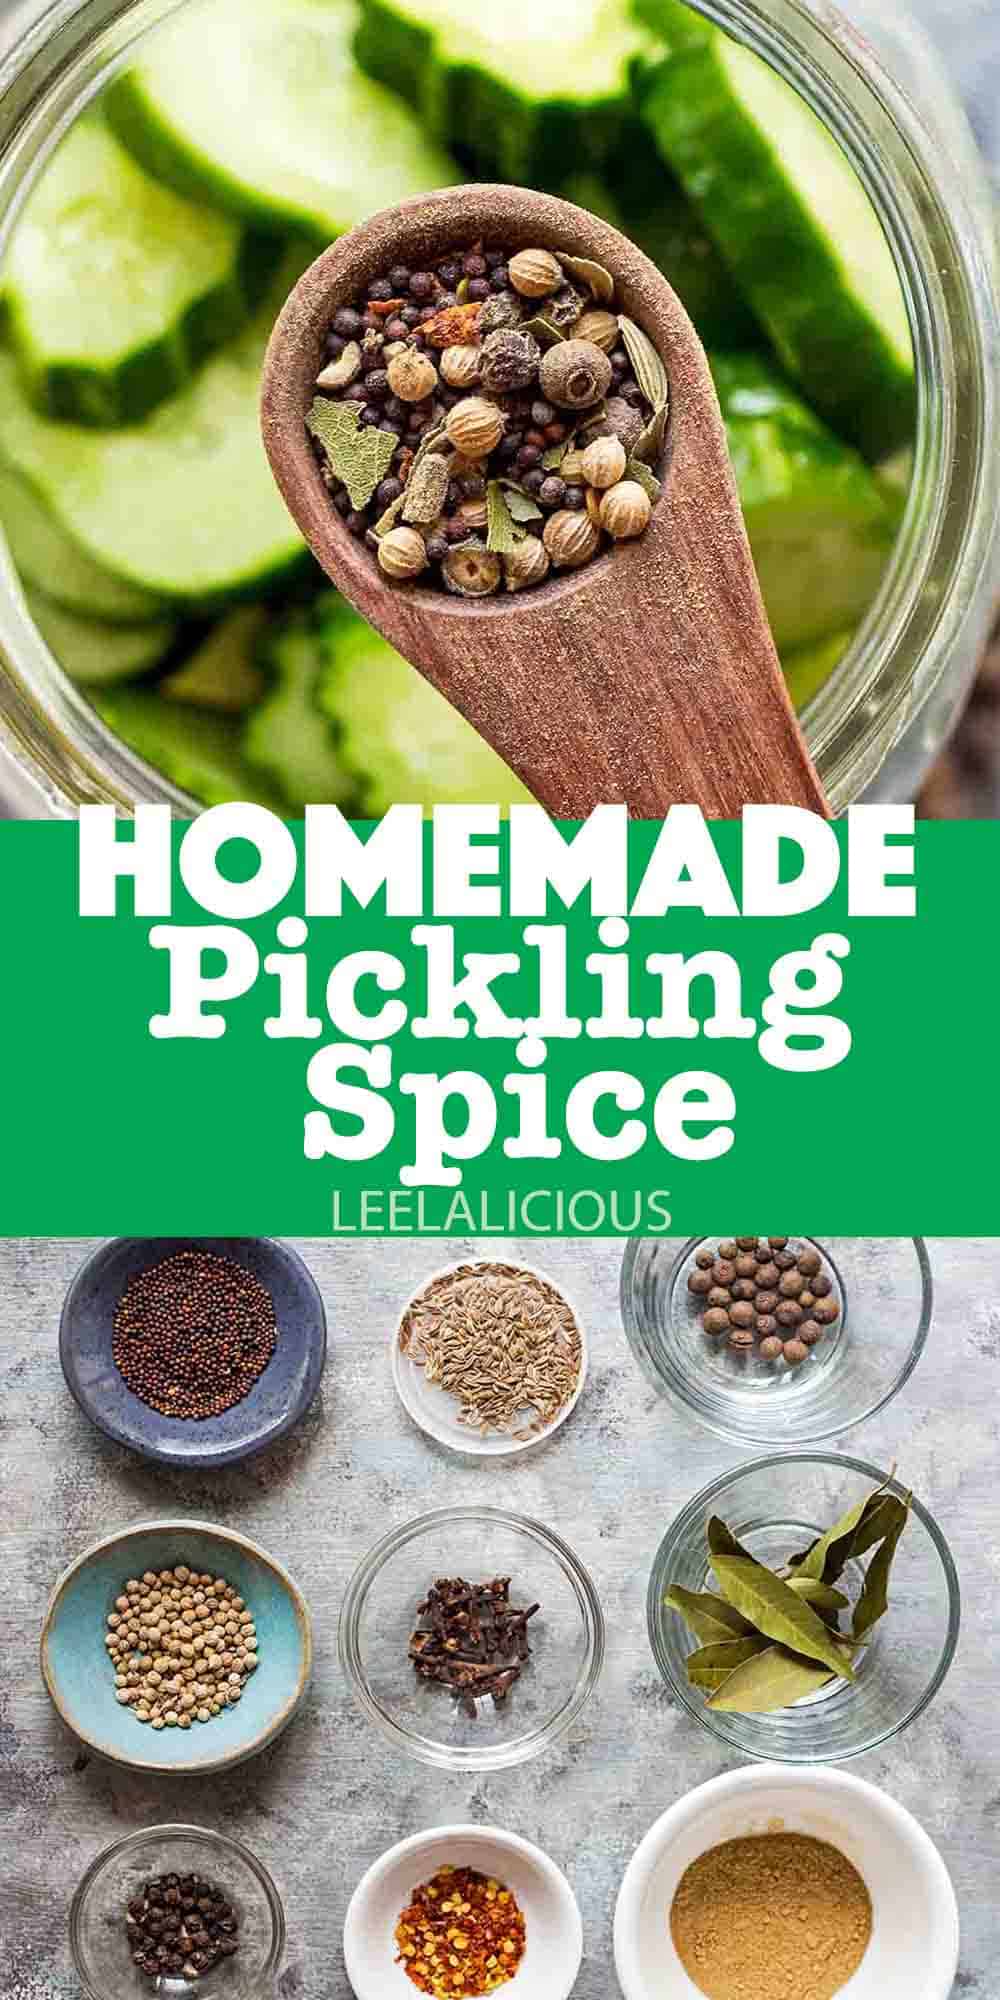 Ingredients to make homemade pickling spice